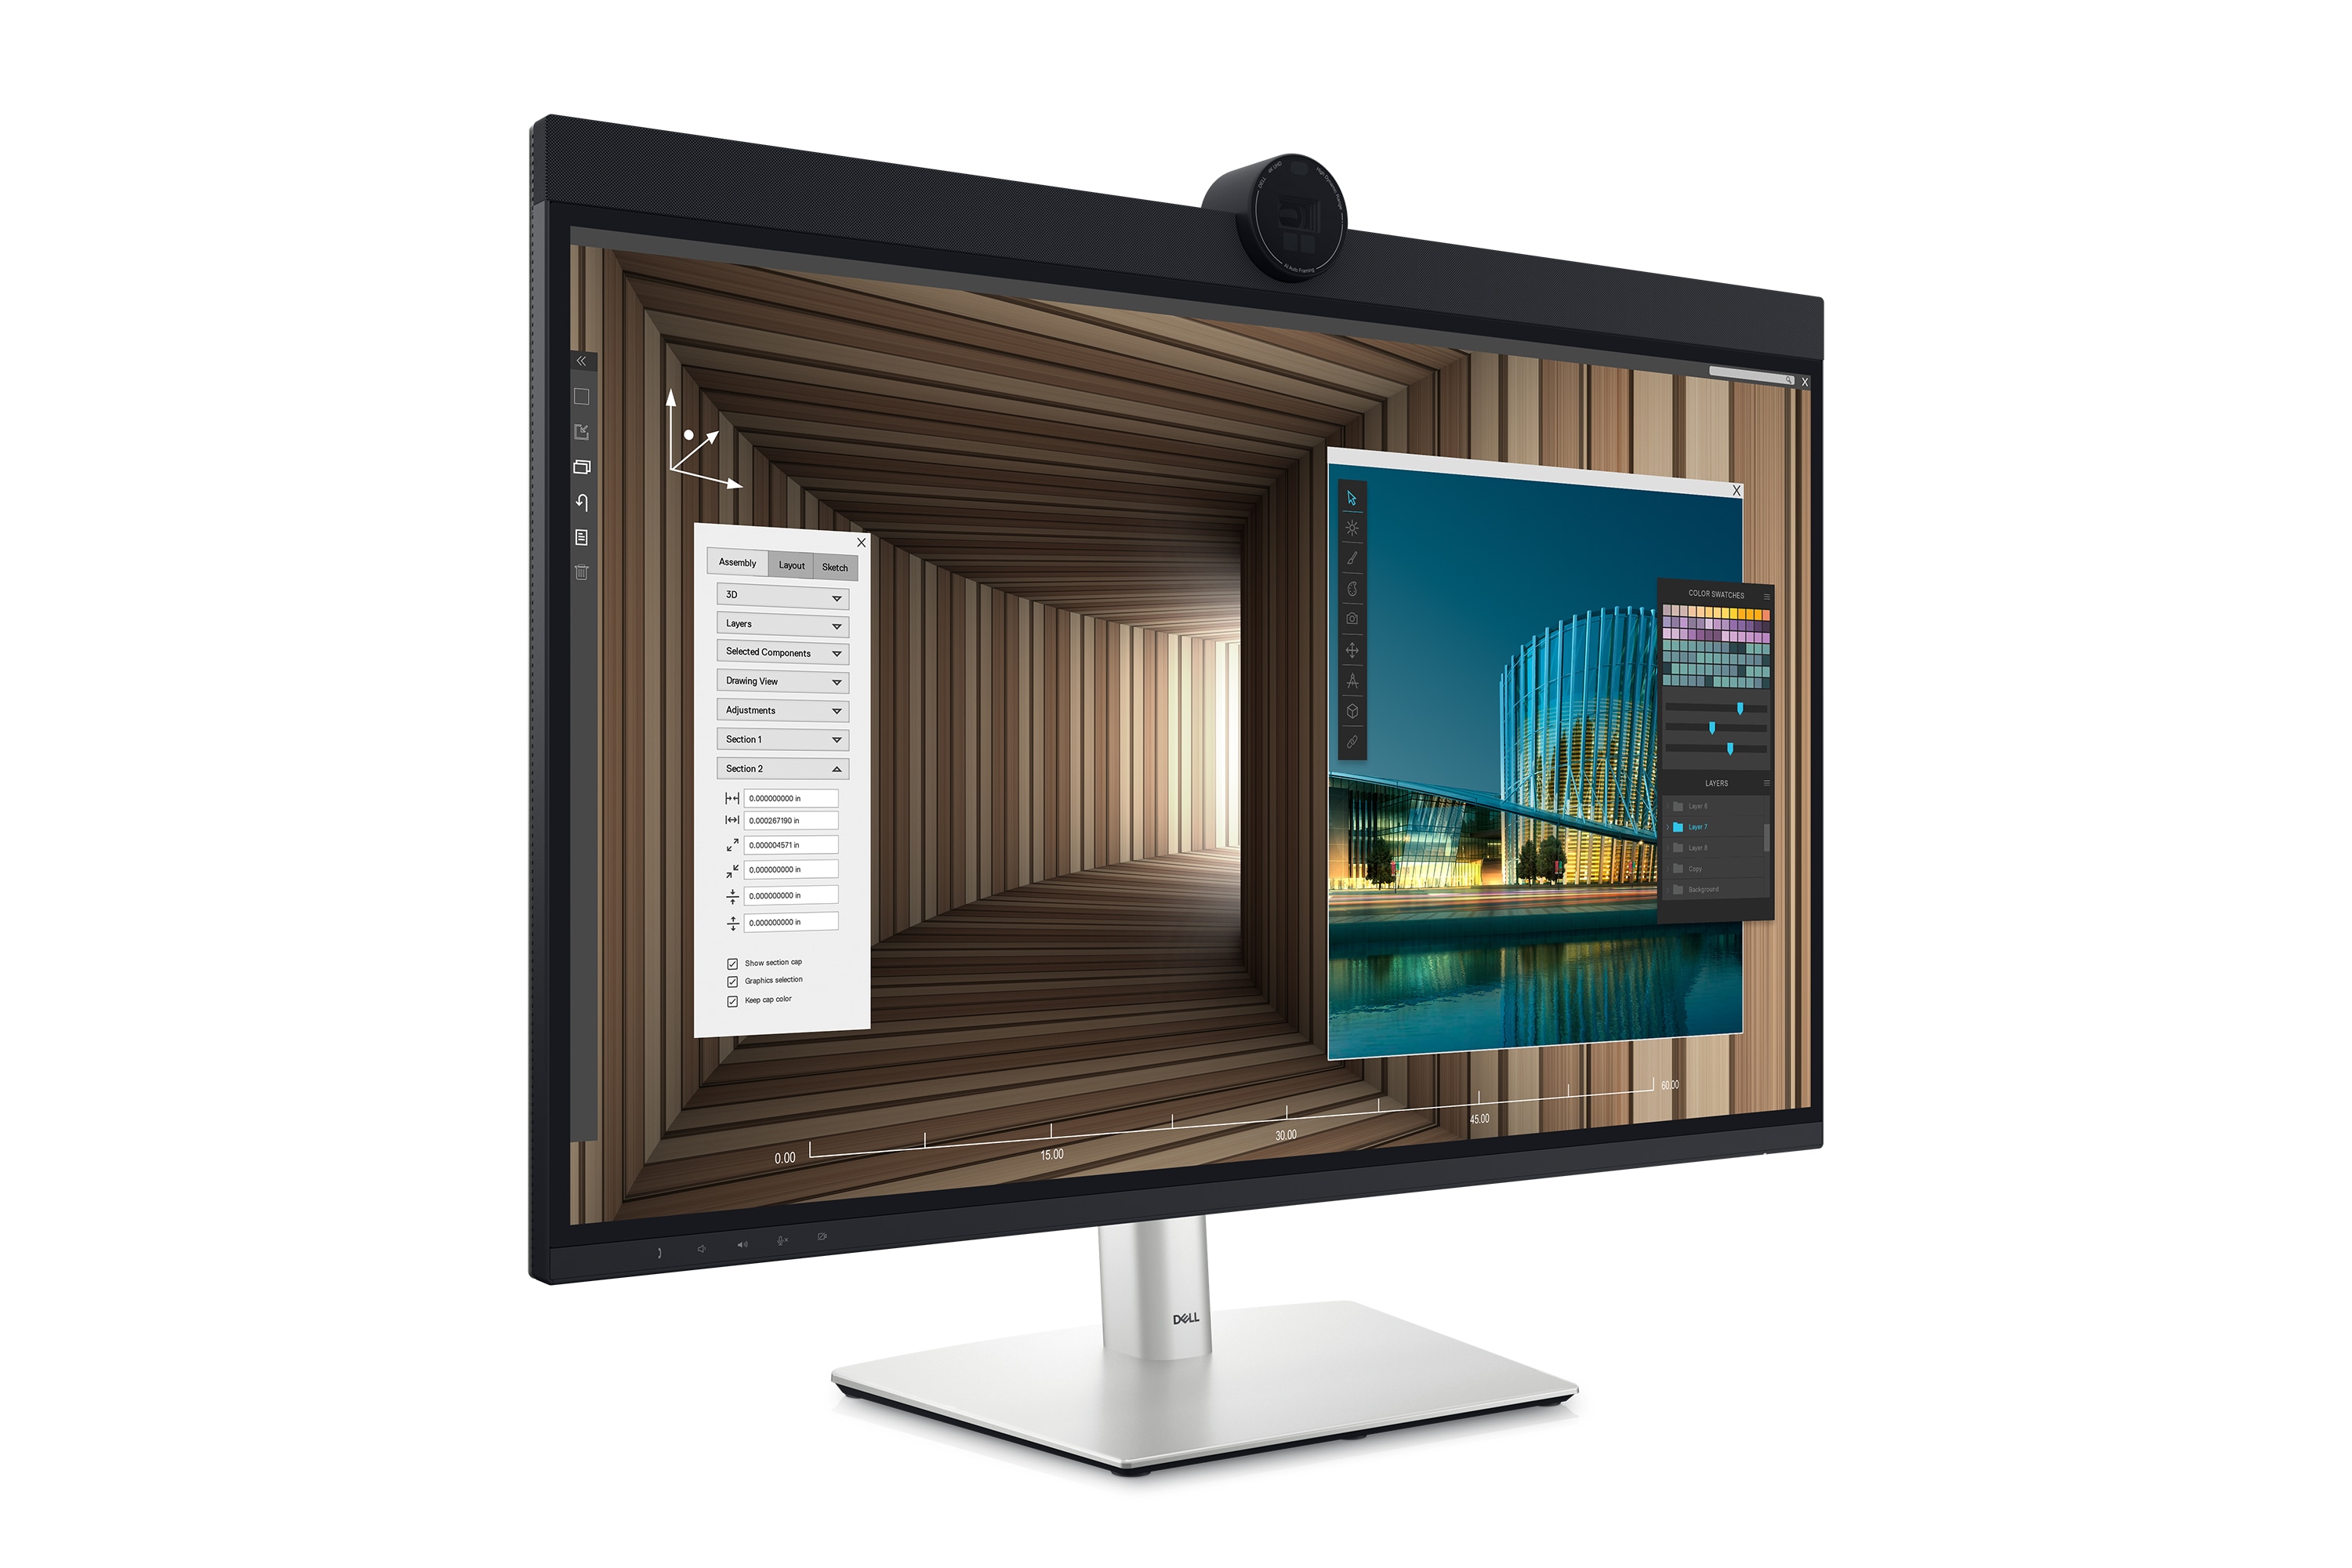 http://i.dell.com/is/image/DellContent/content/dam/ss2/product-images/dell-client-products/peripherals/monitors/u-series/u3224kb/pdp/monitor-ultrasharp-u3224kb-pdp-hero.psd?fmt=jpg&wid=3000&hei=2000